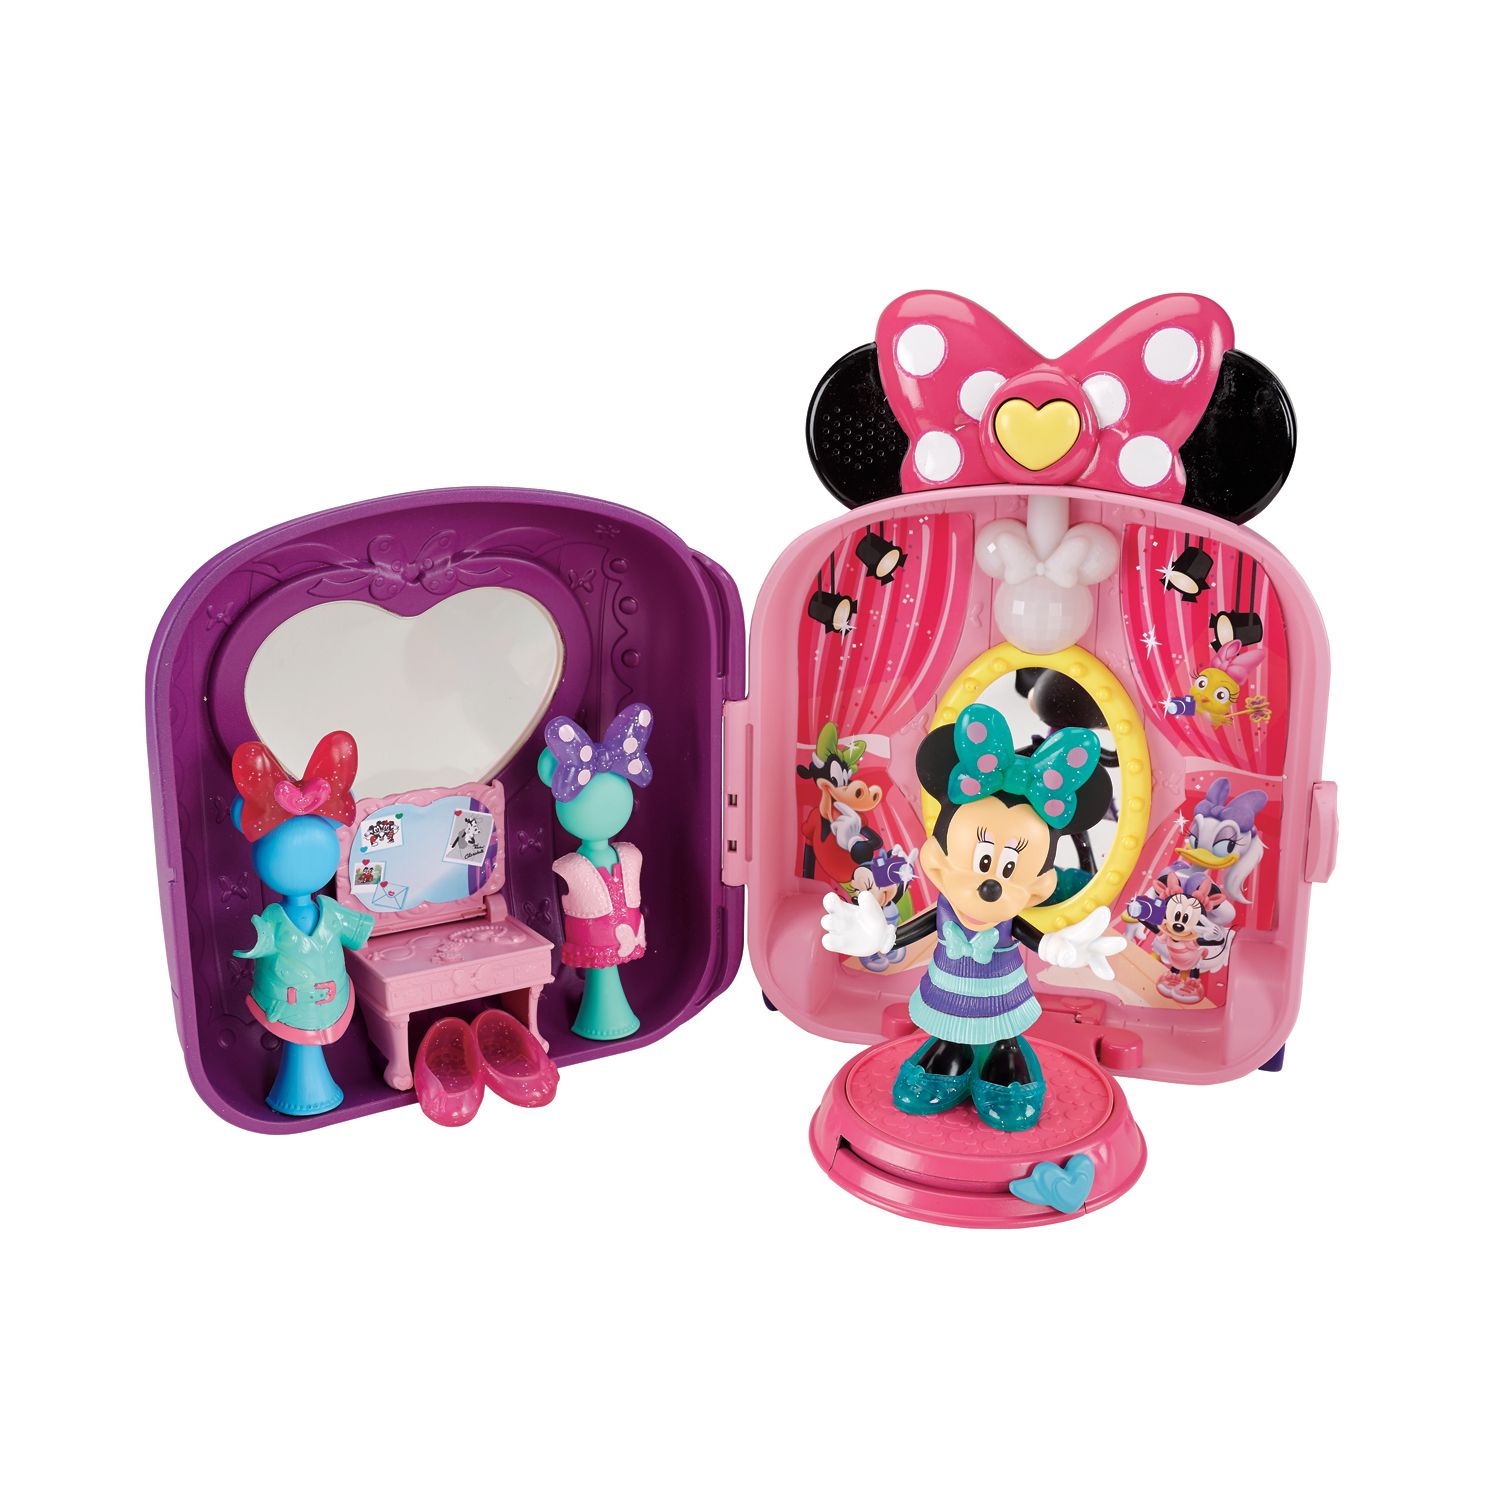 Minnie Mouse Dress Up 'n Go Bow-Tique 